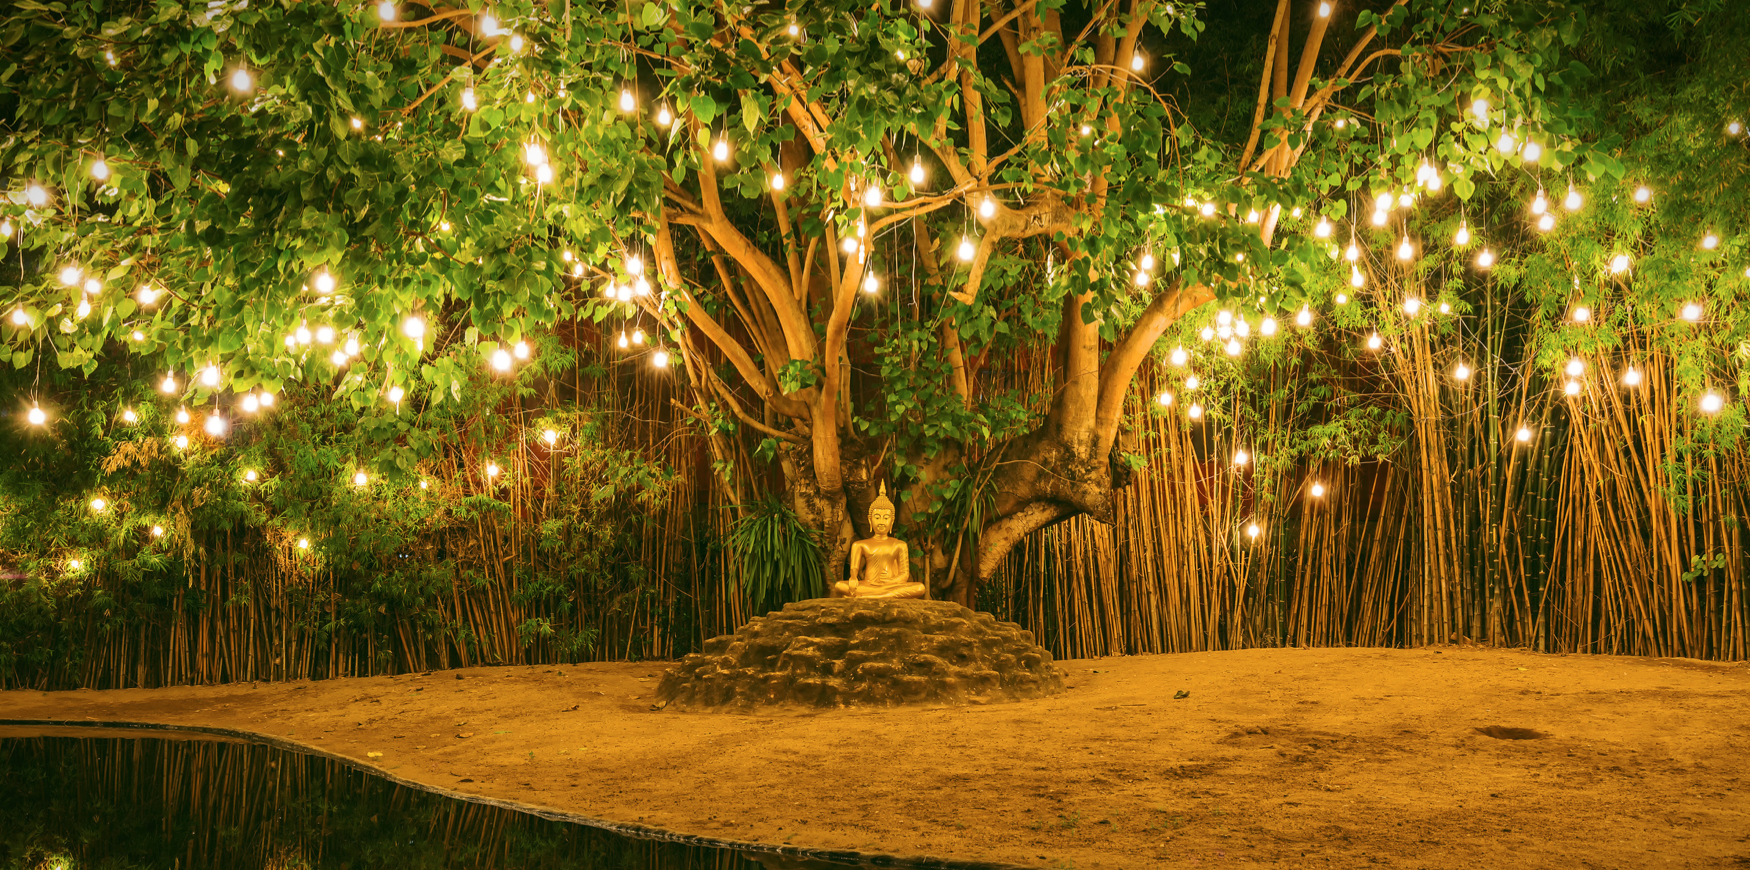 A gold Buddha sitting under a Bodhi tree with lights